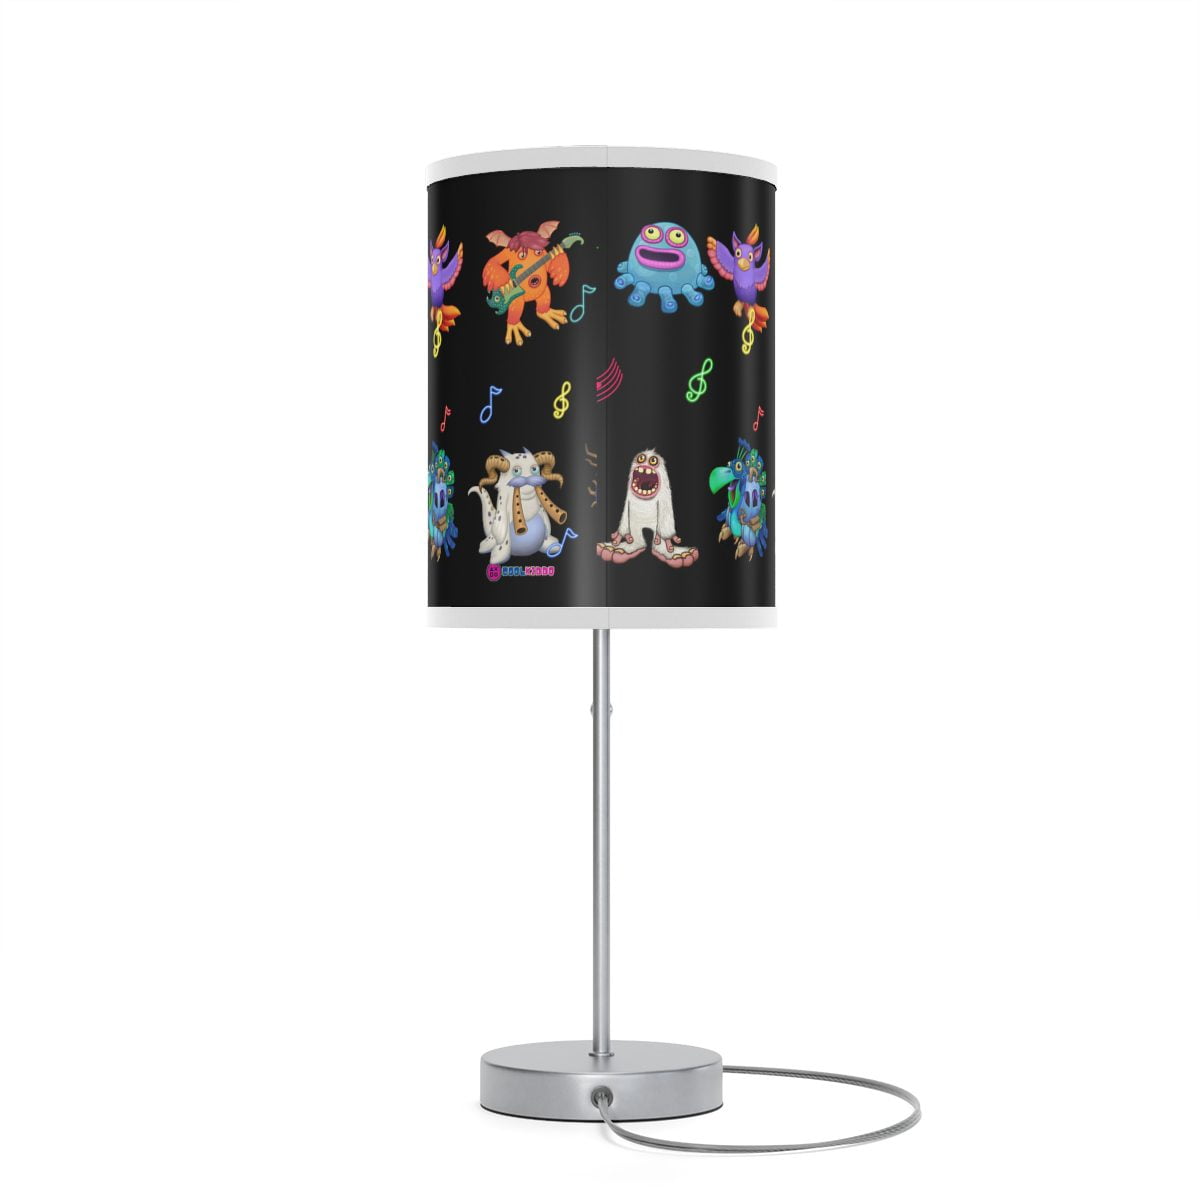 My Singing Monsters Black Lamp with Colorful Characters Cool Kiddo 24